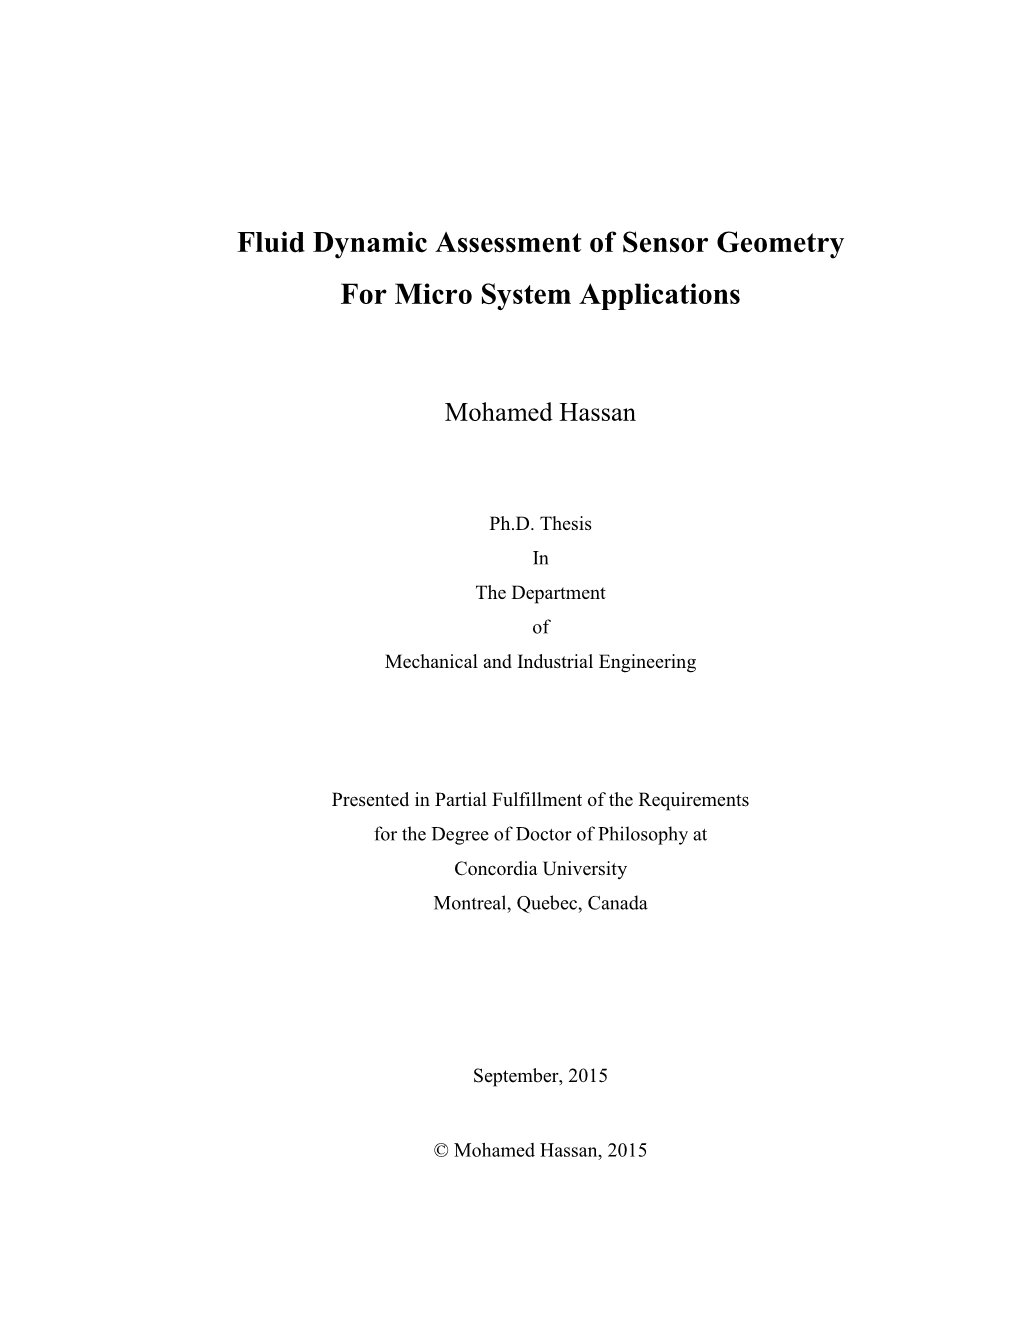 Fluid Dynamic Assessment of Sensor Geometry for Micro System Applications